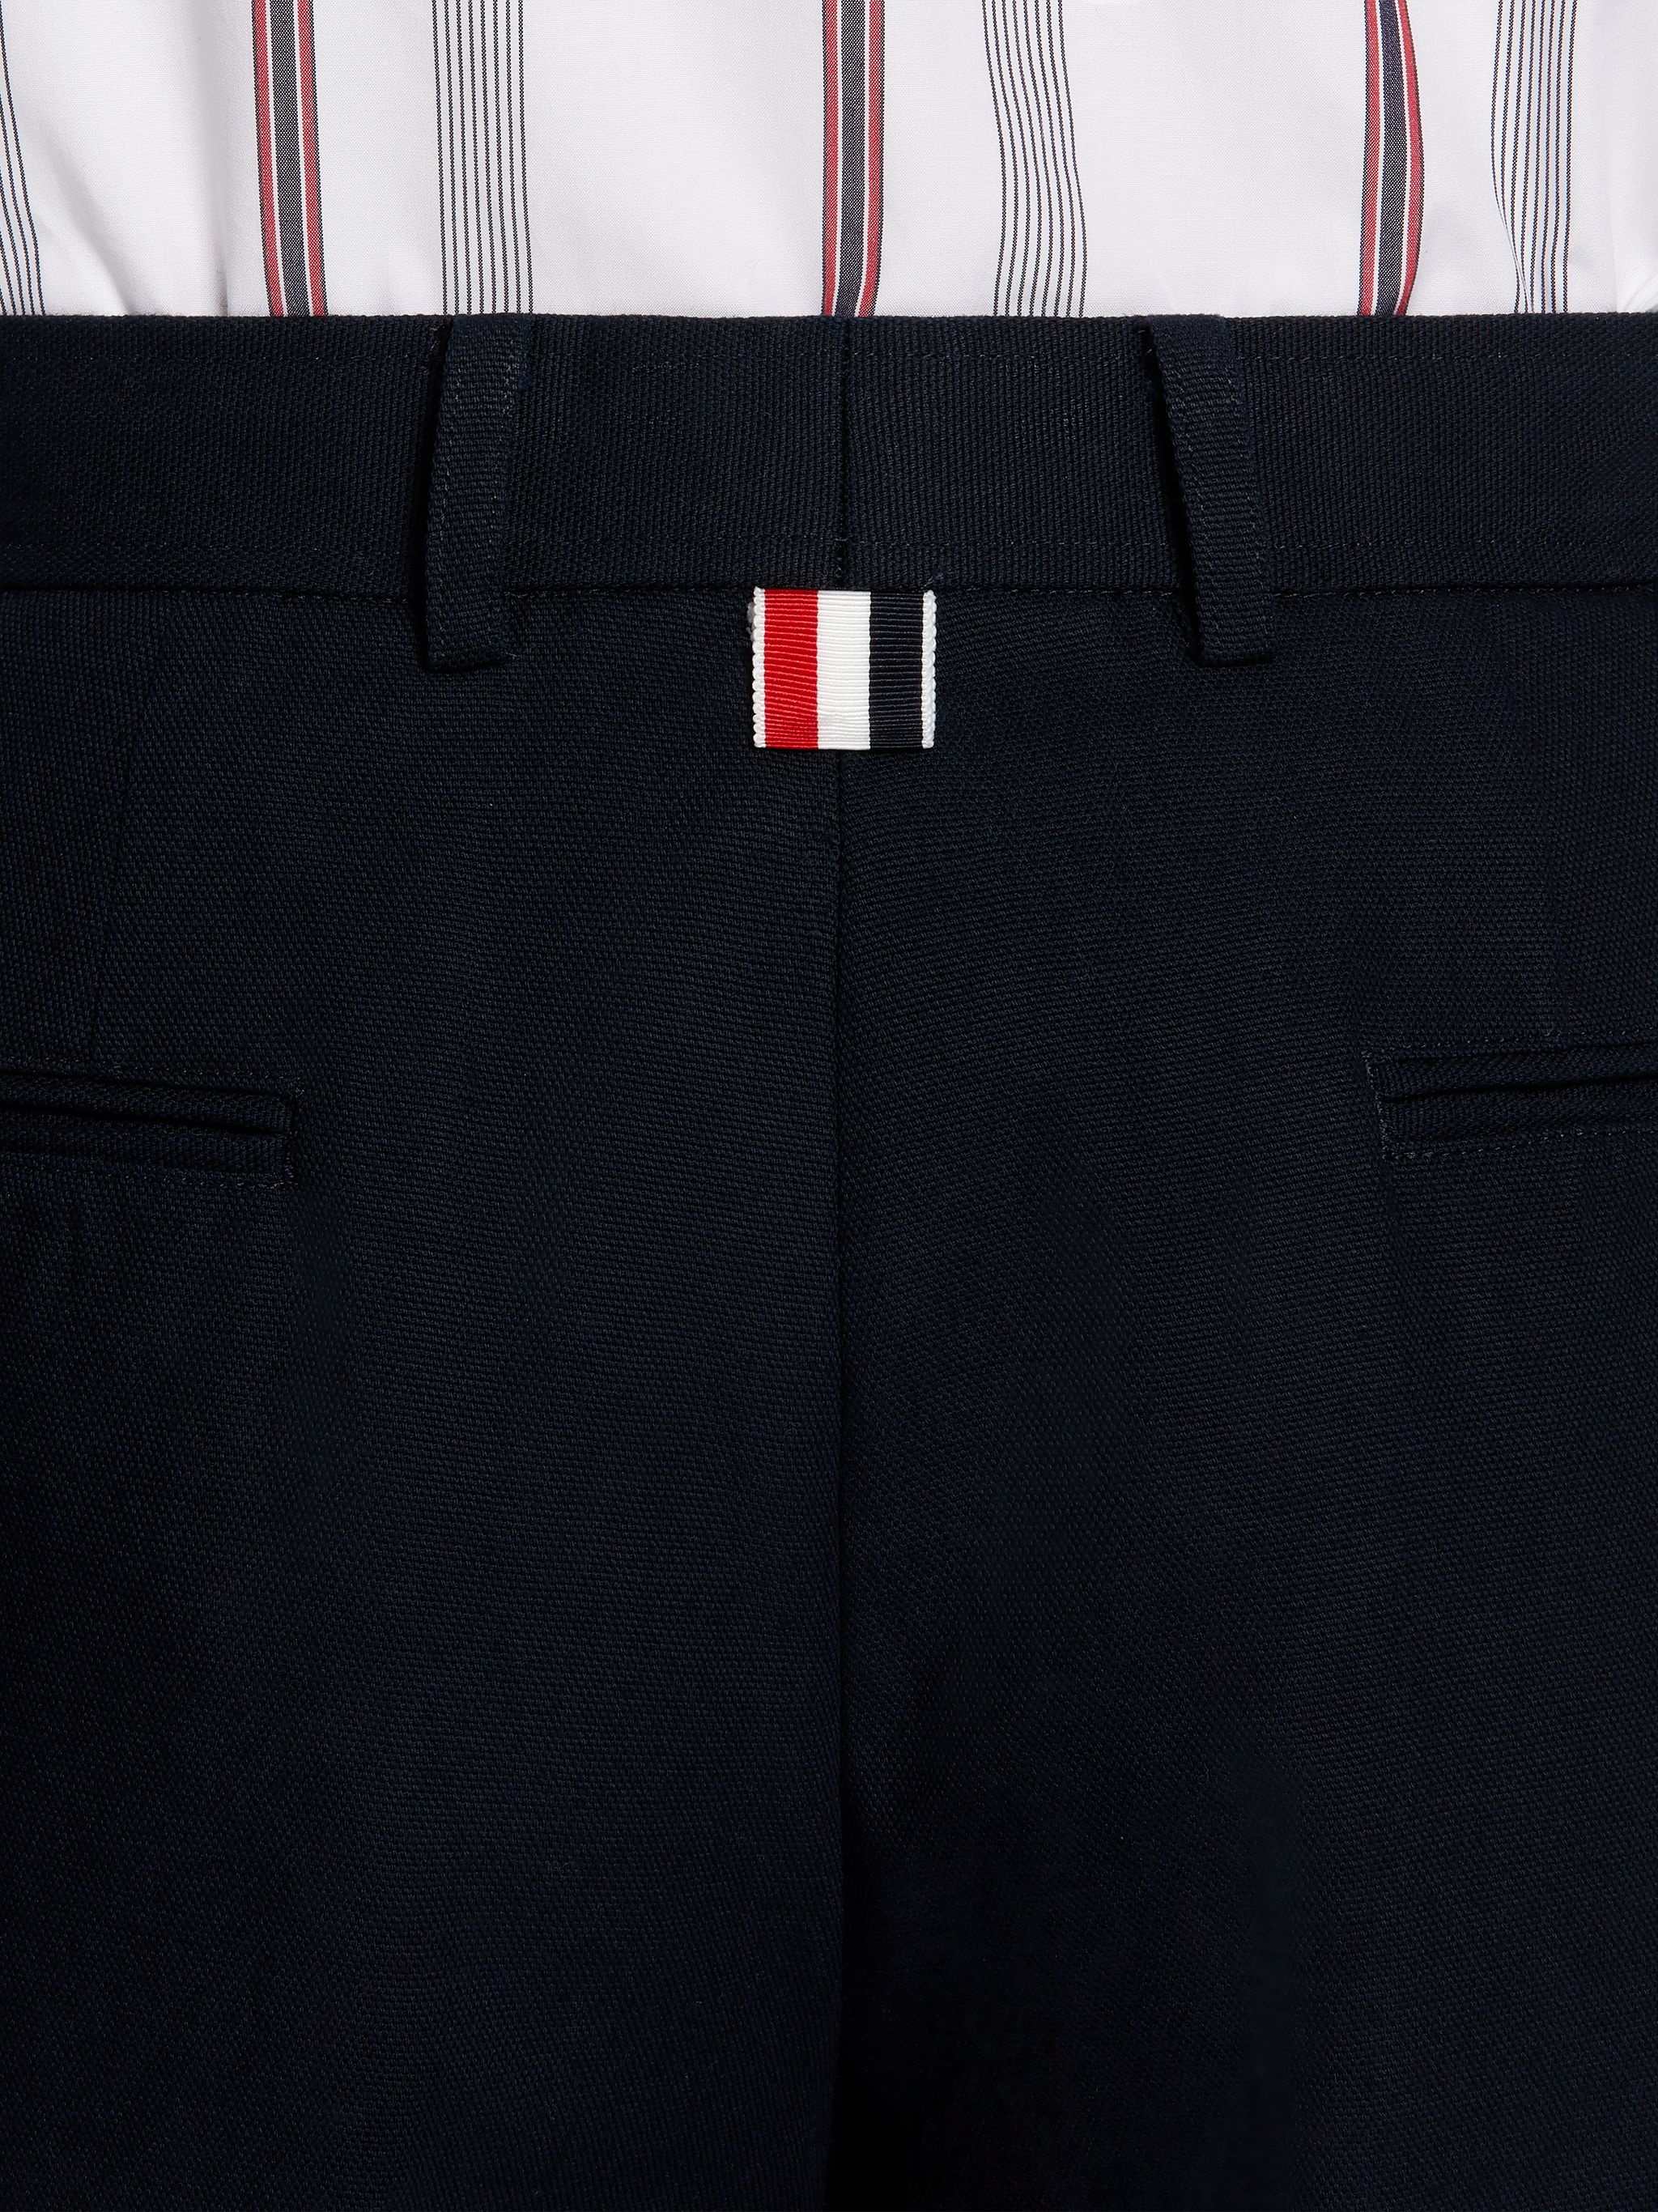 Navy Washed Cotton Canvas Embroidered 4-Bar Unconstructed Chino Short - 6